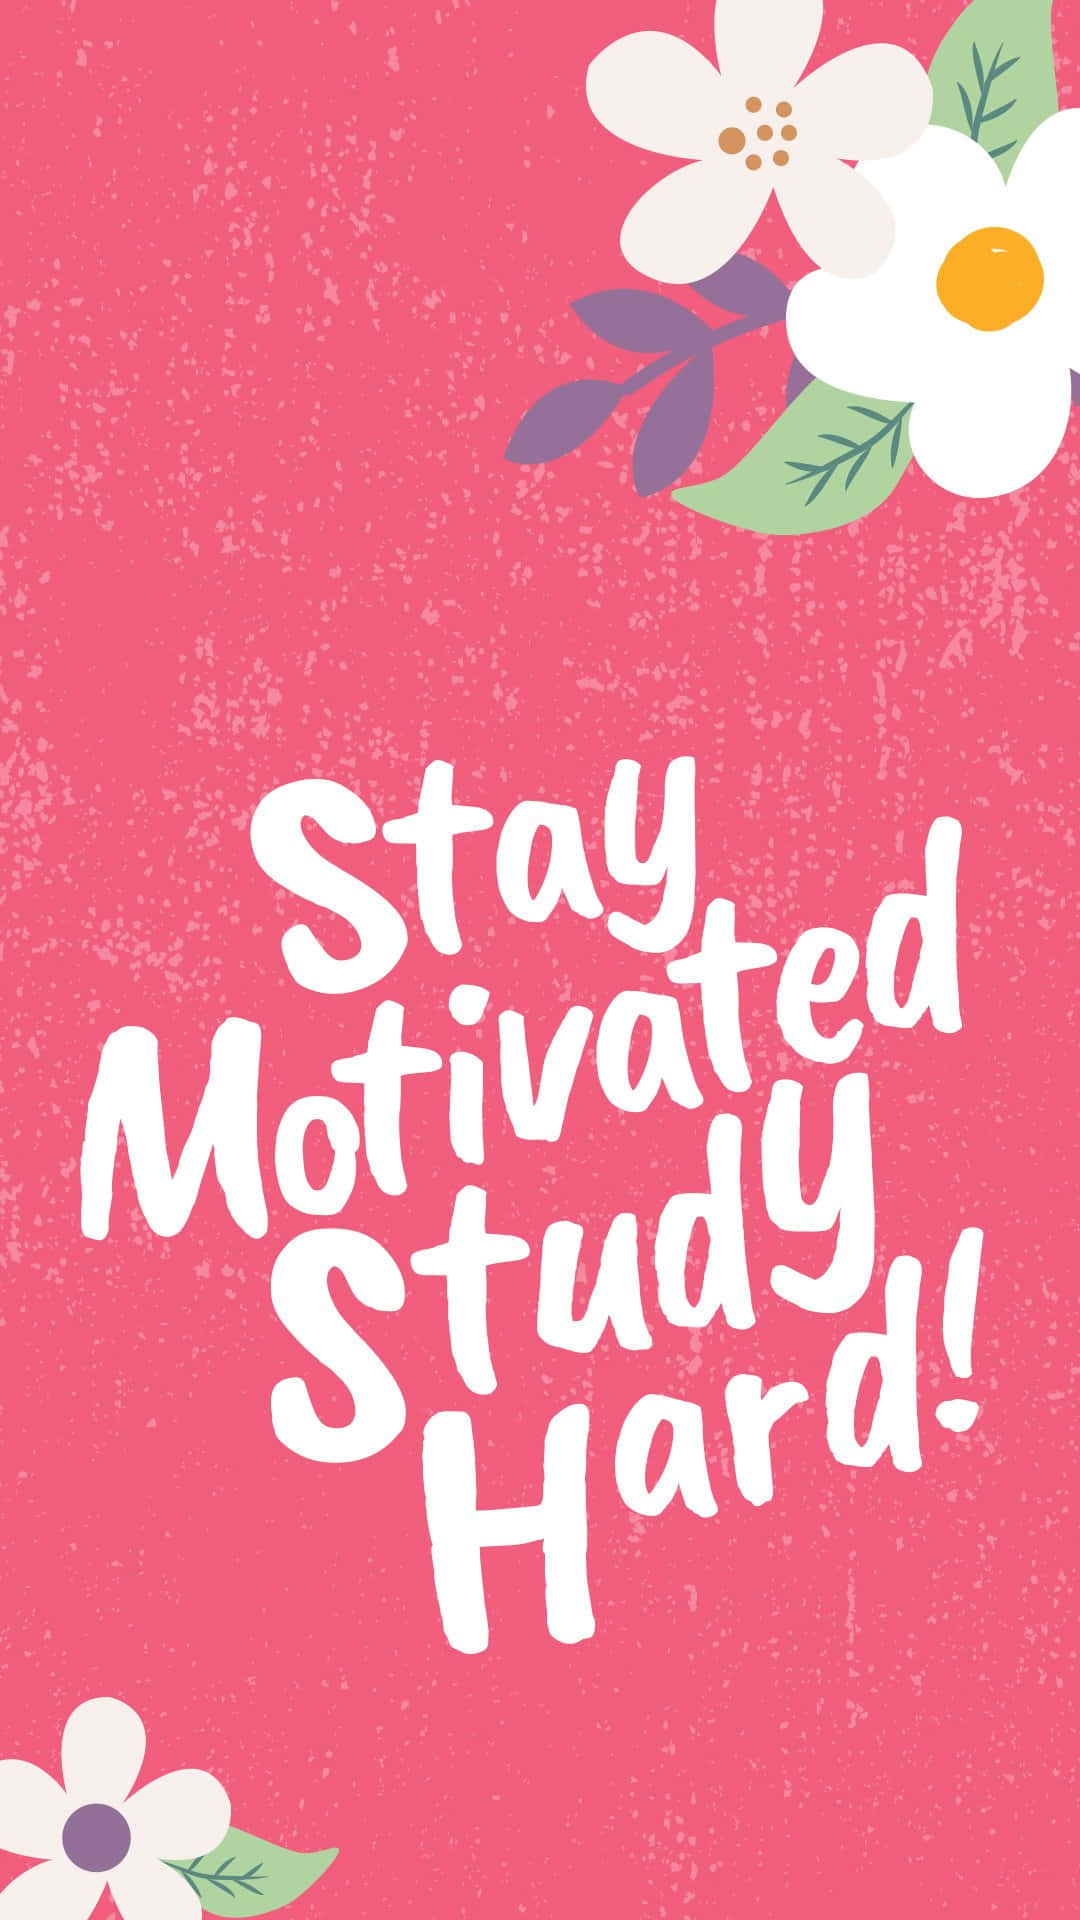 Stay Motivated Study Hard